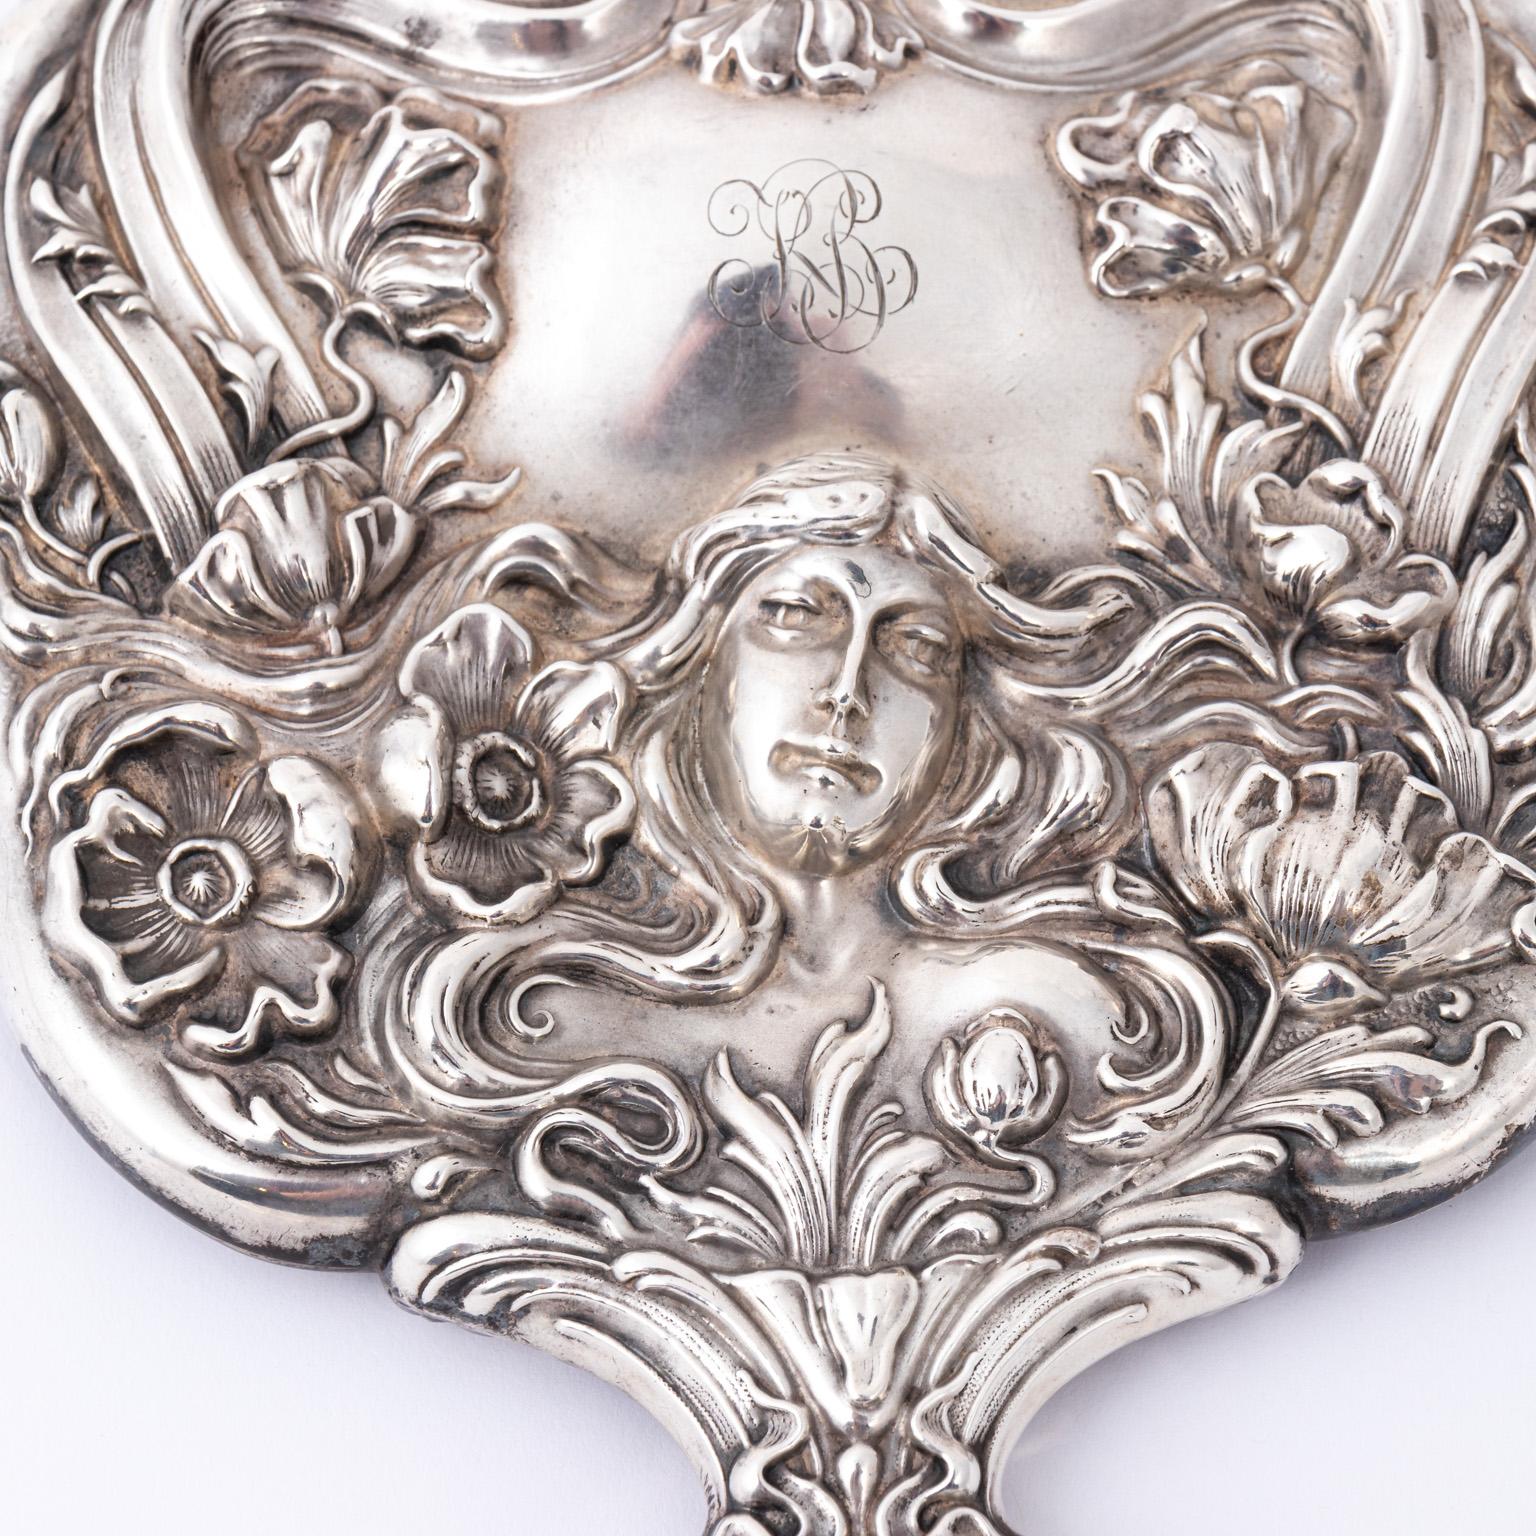 Antique Sterling Silver Repousse Vanity Mirror 5